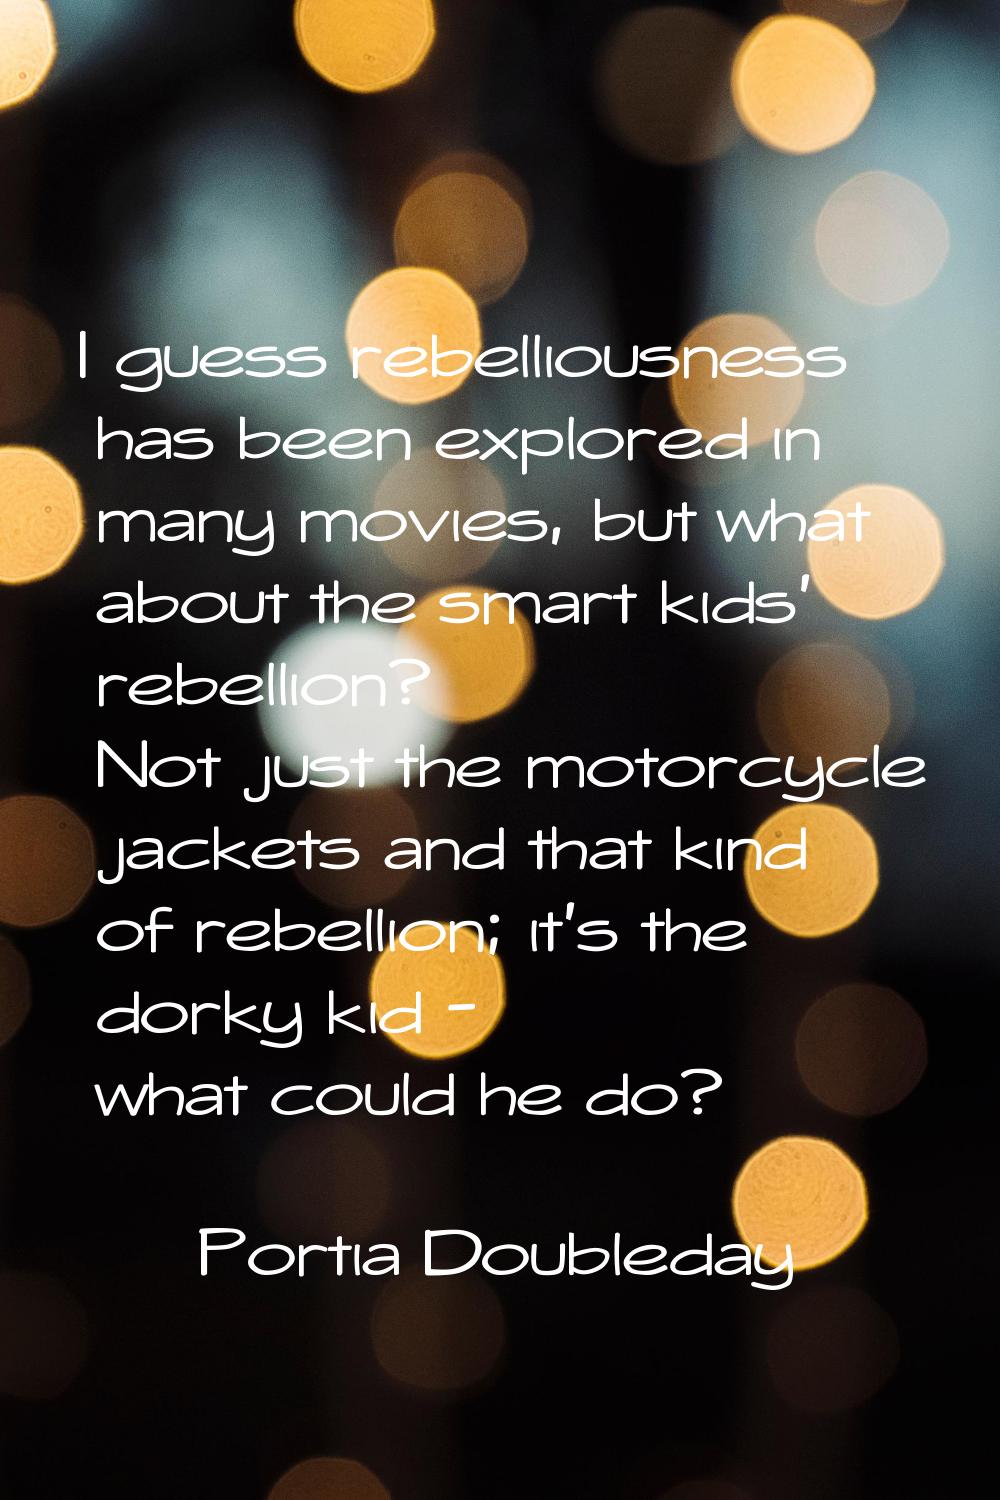 I guess rebelliousness has been explored in many movies, but what about the smart kids' rebellion? 